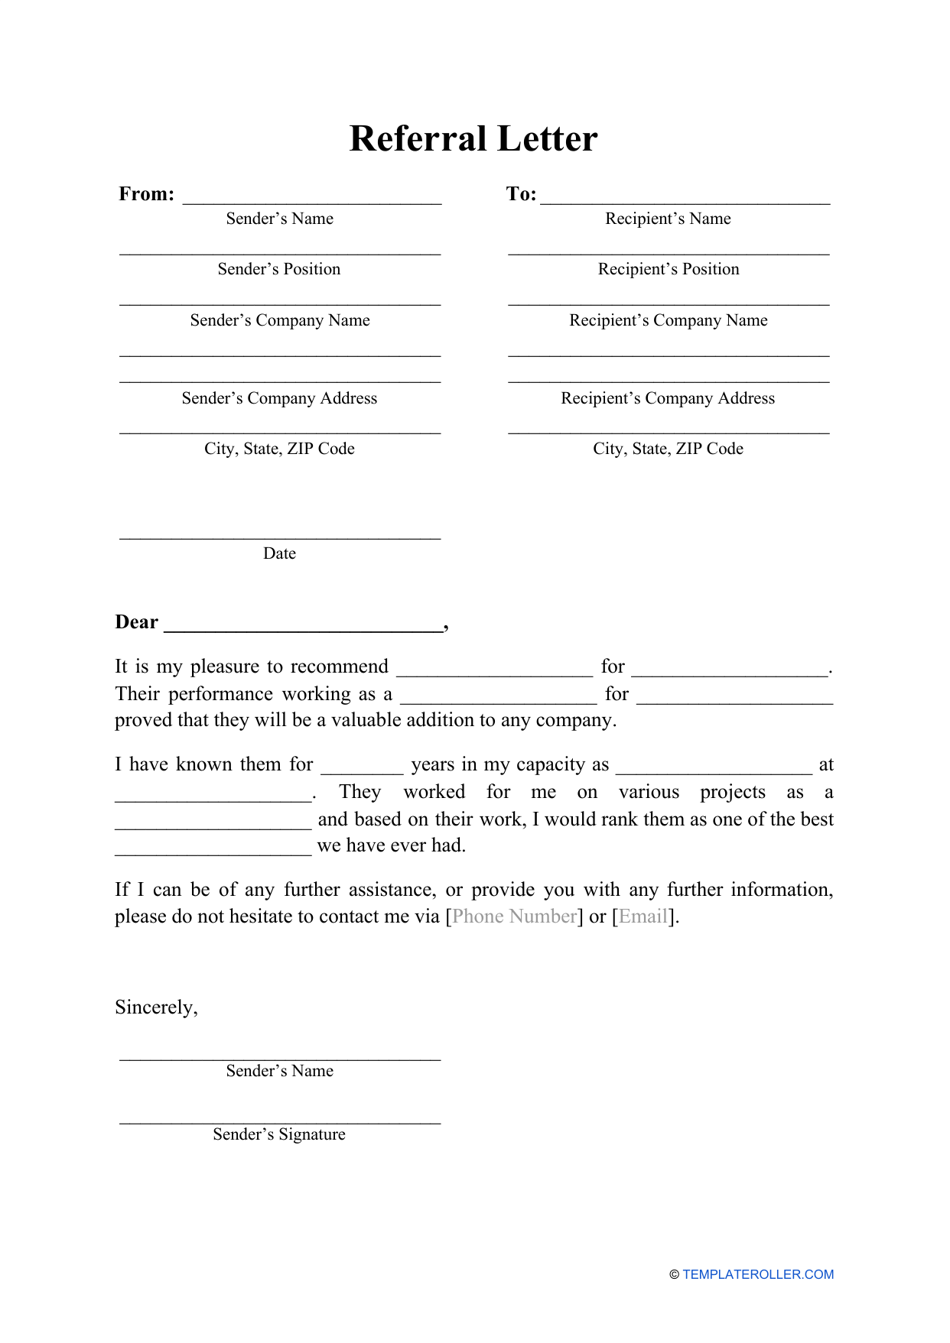 Referral Letter Template - Preview